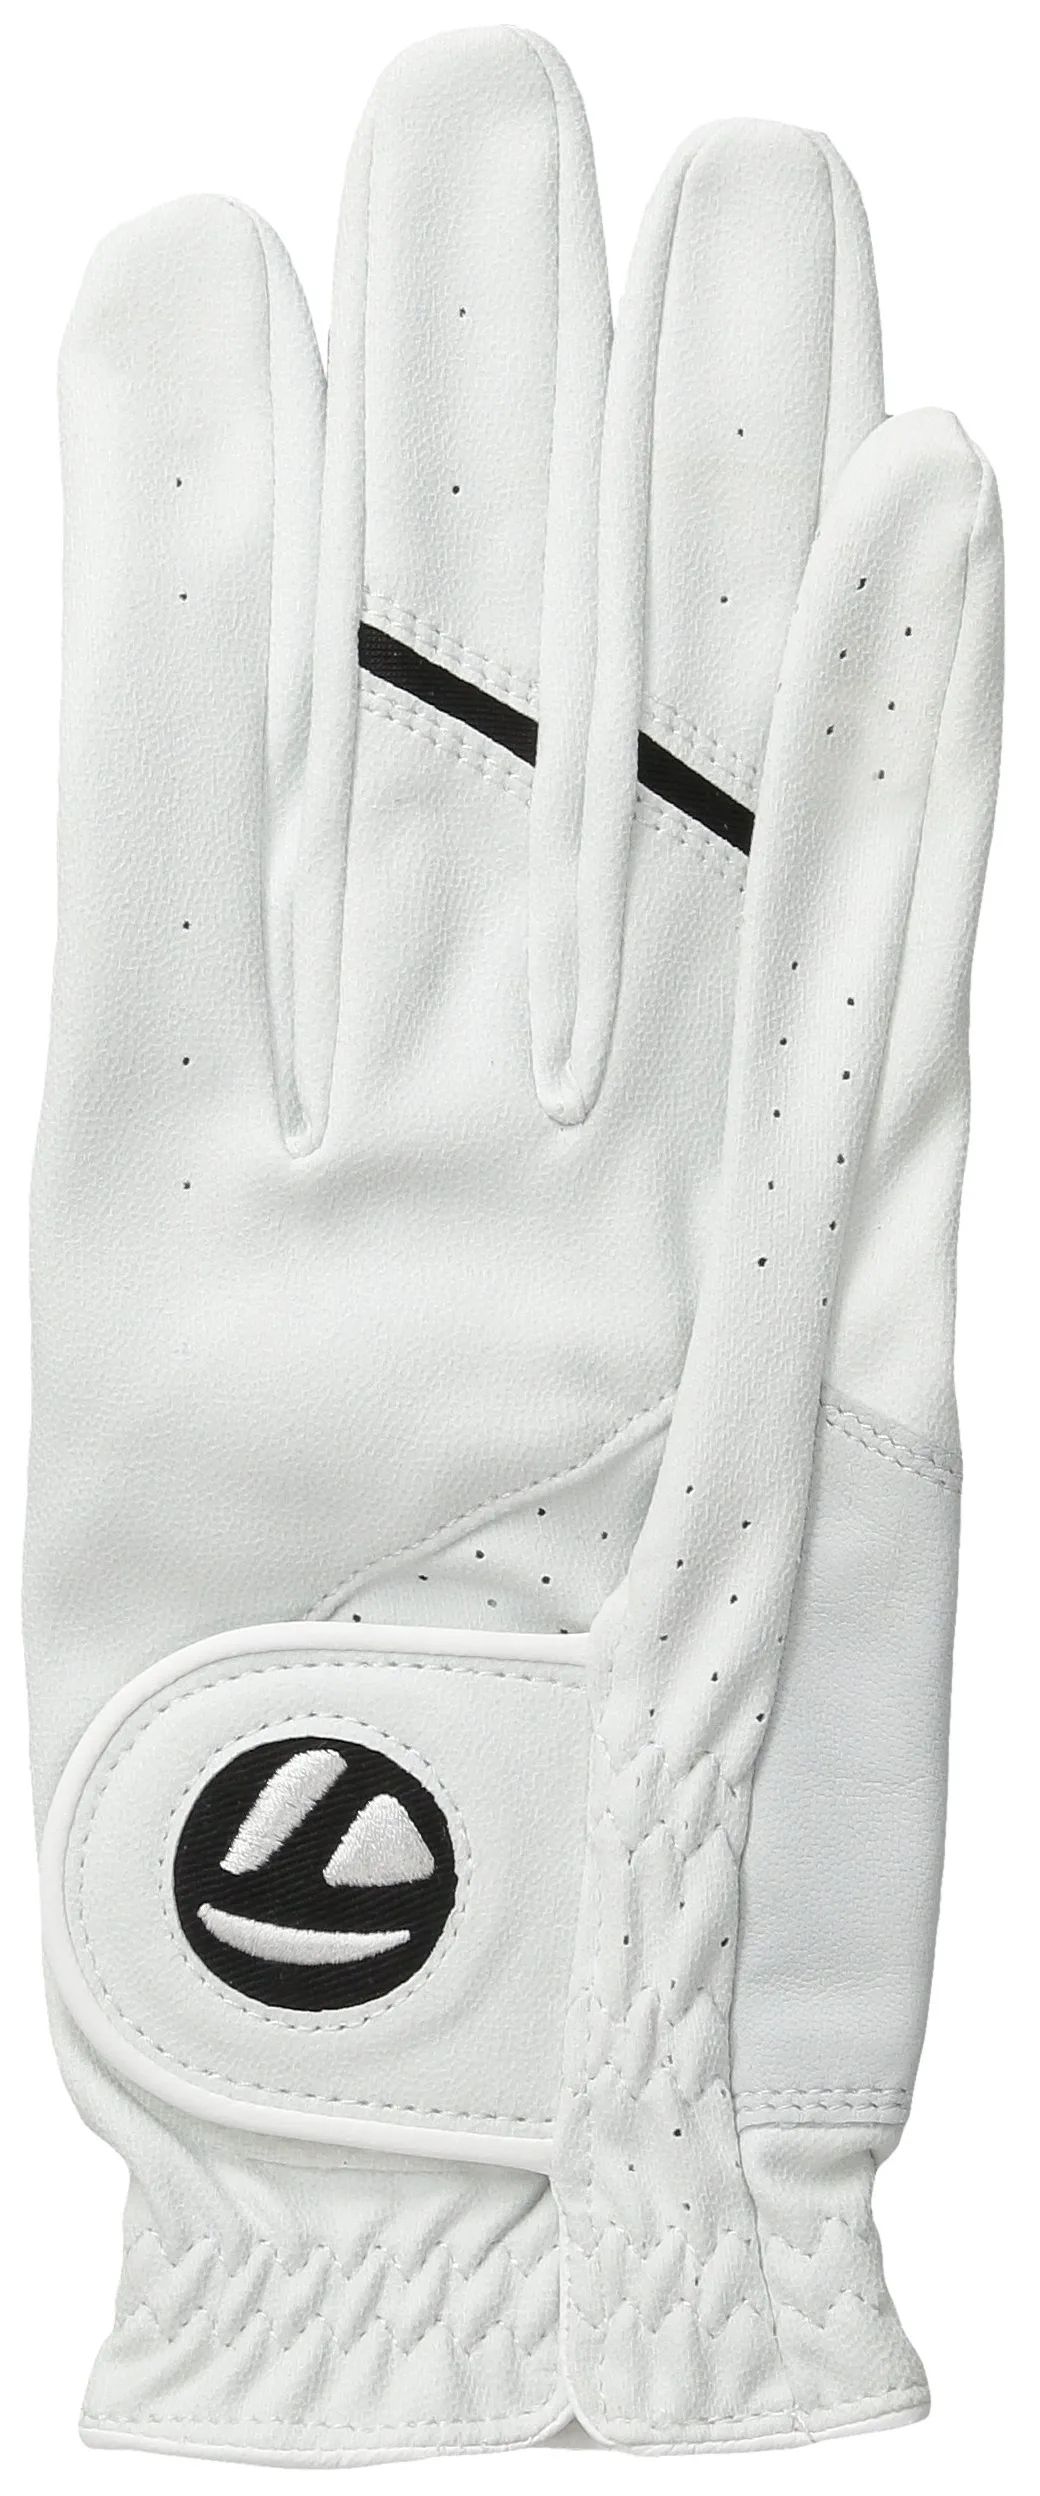 taylormade all weather glove